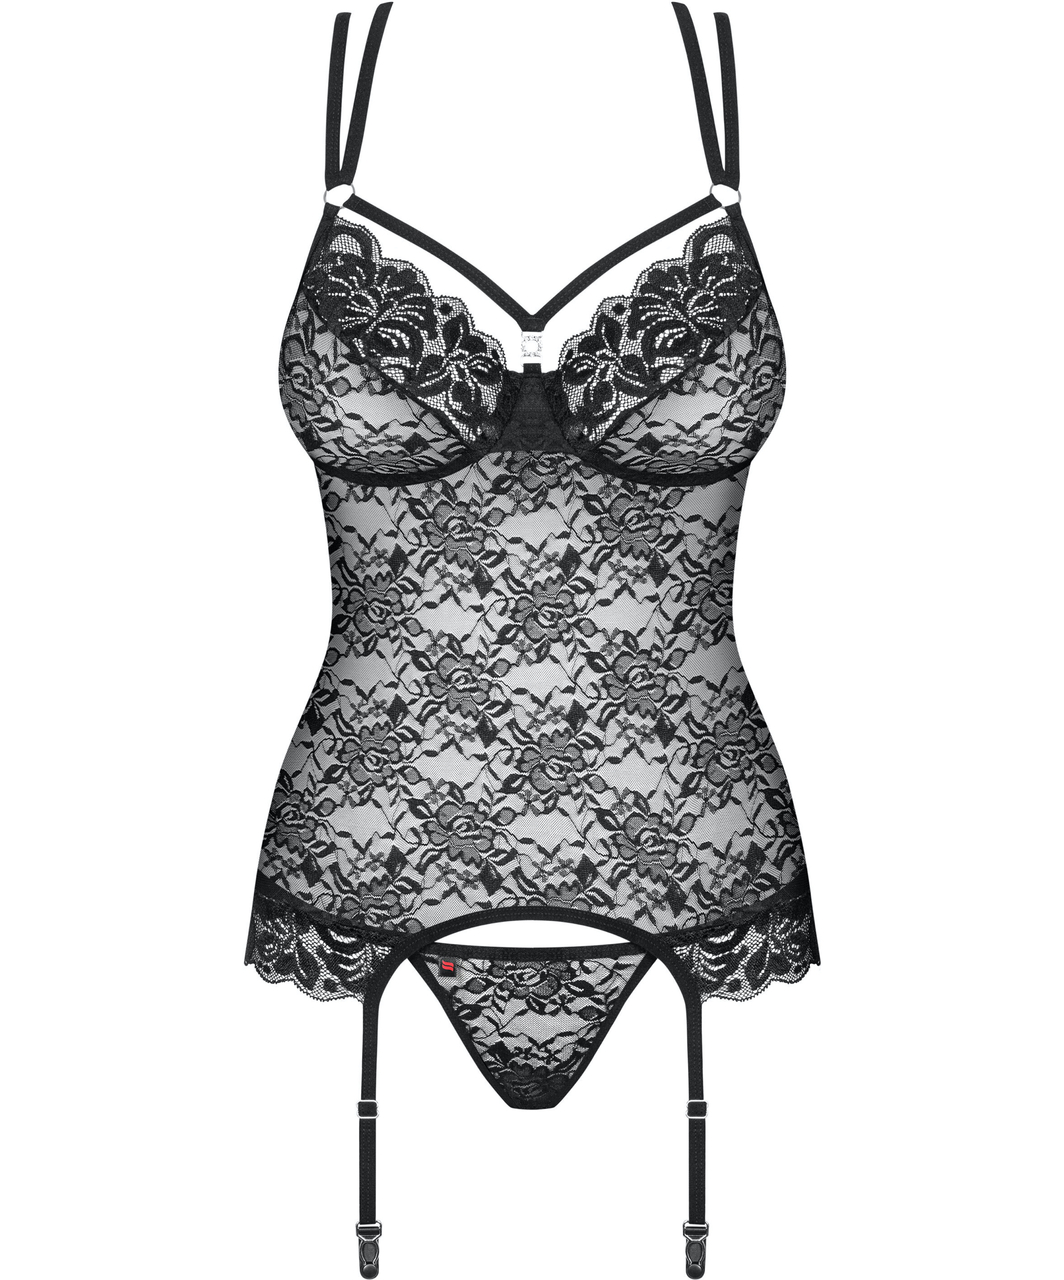 Obsessive black lace basque with string